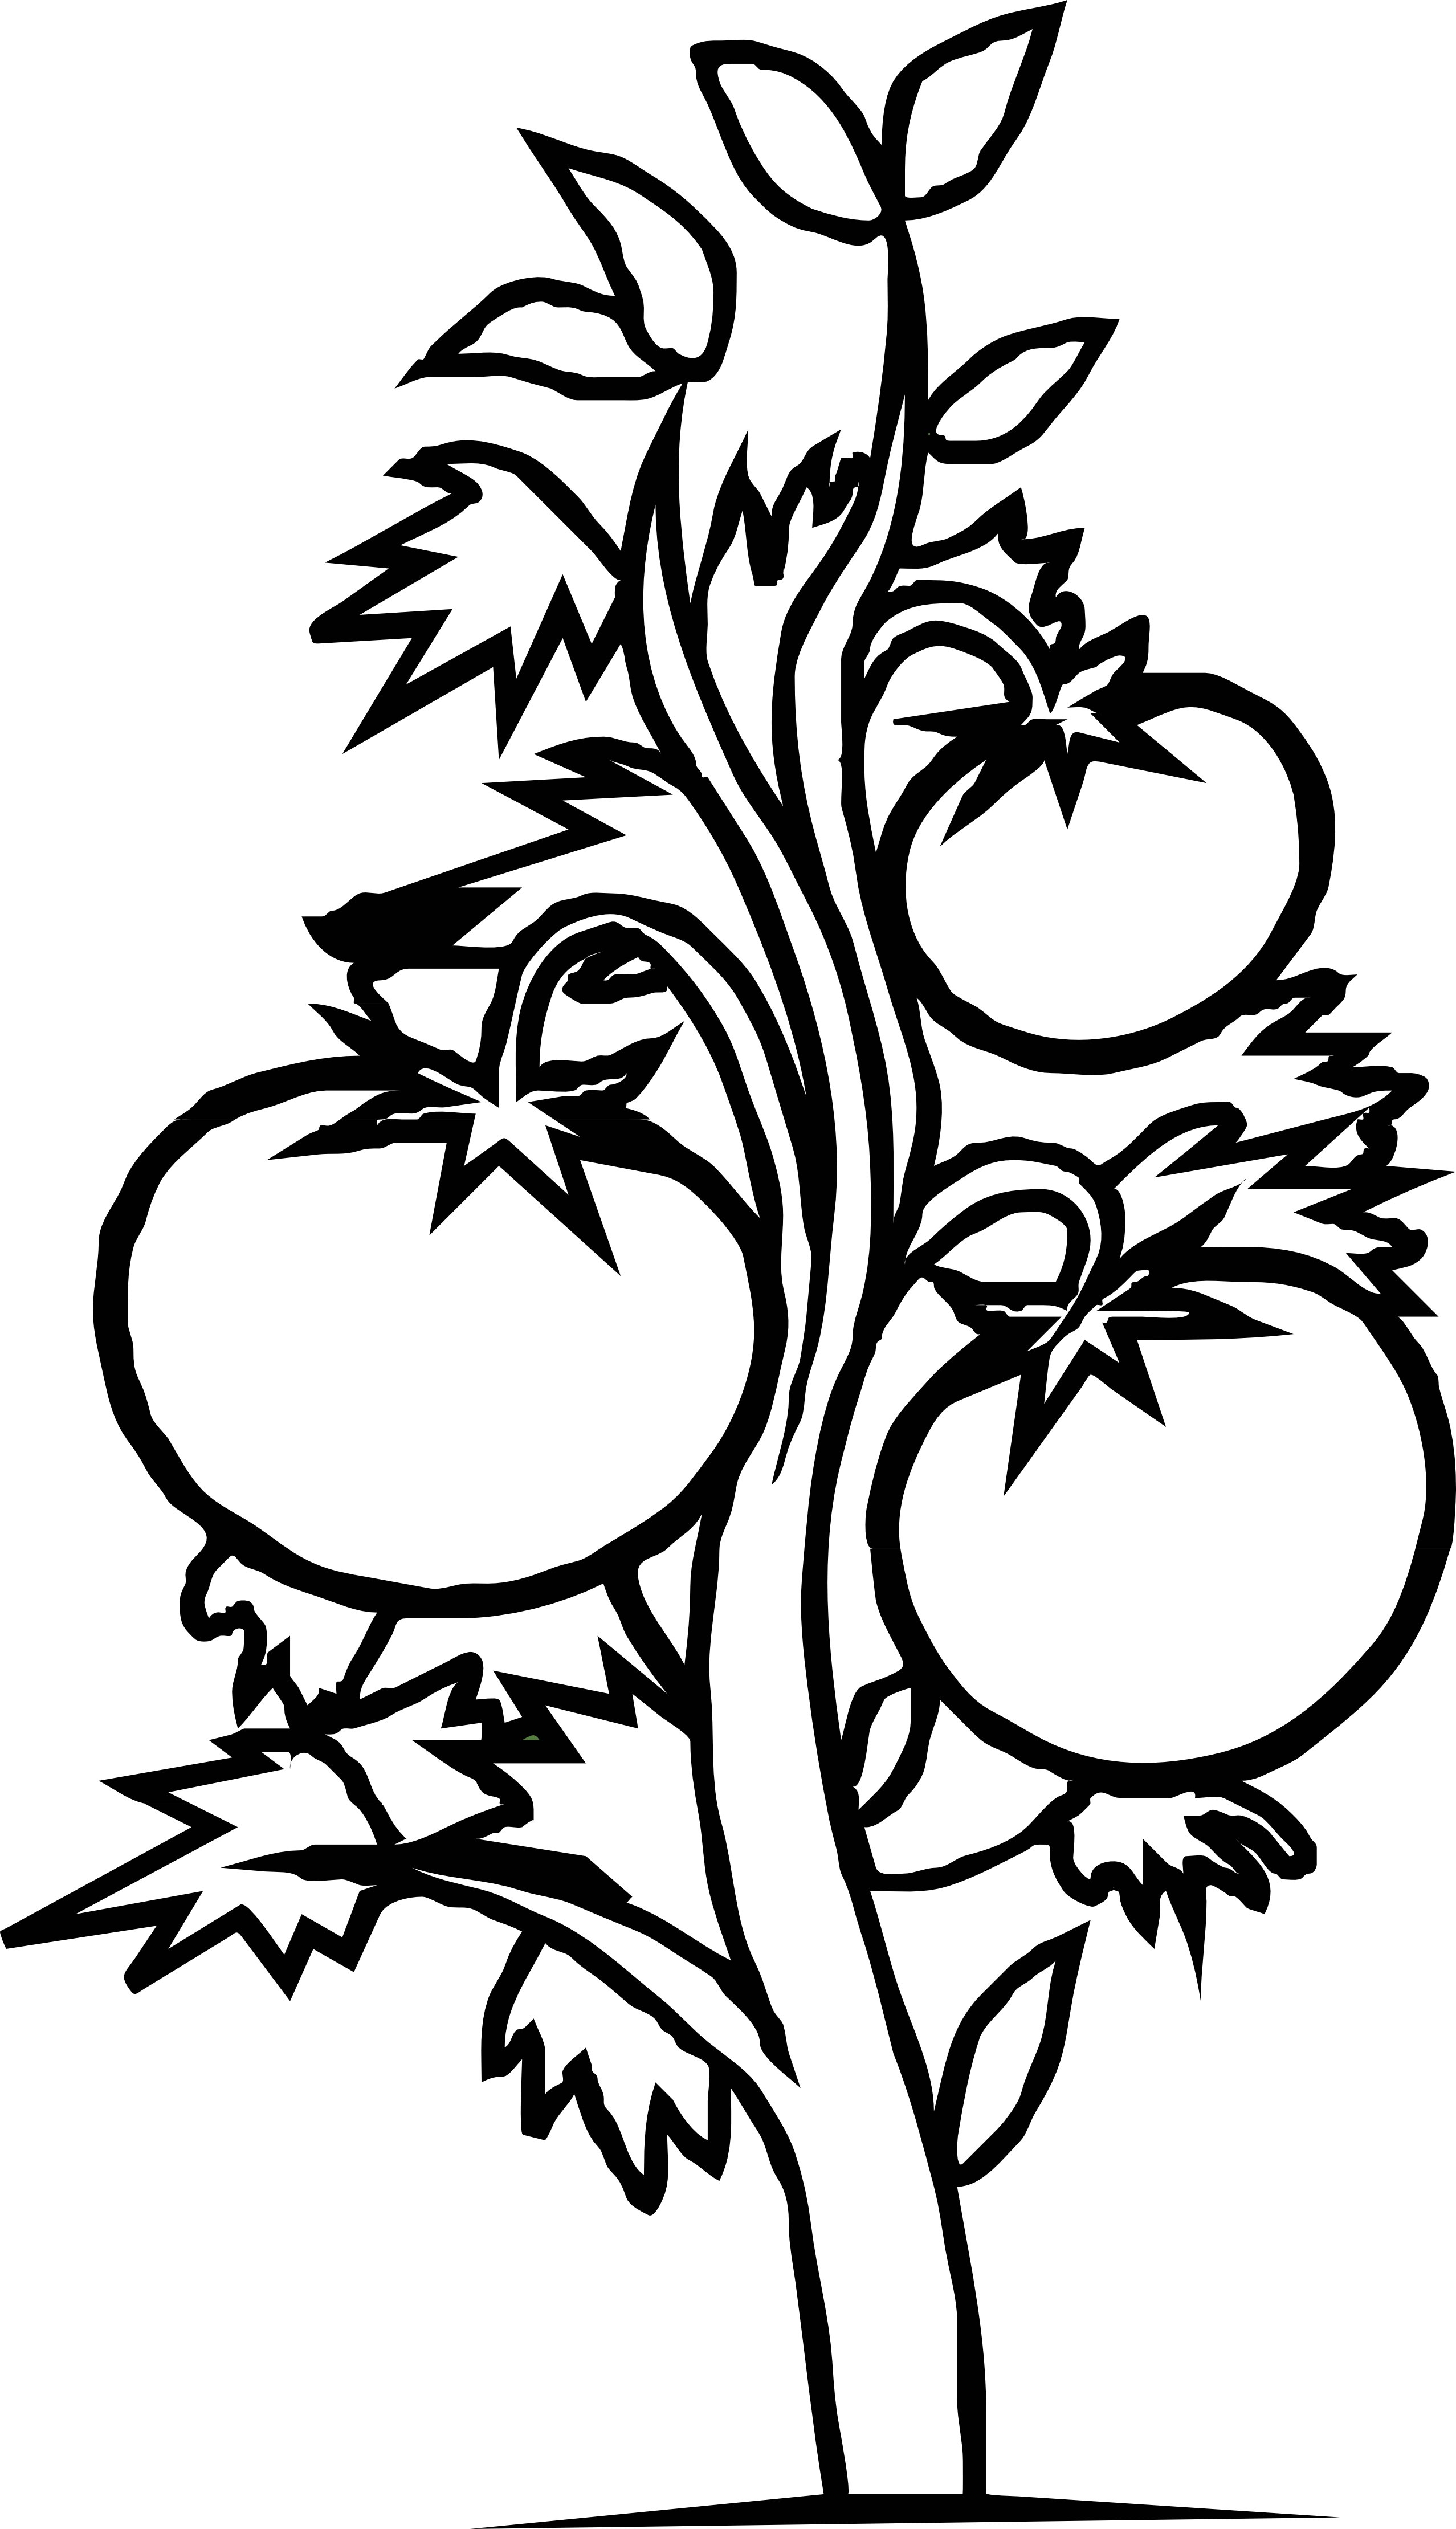 Scbawf44 Shrub Clipart Black And White Free Big Pictures Hd